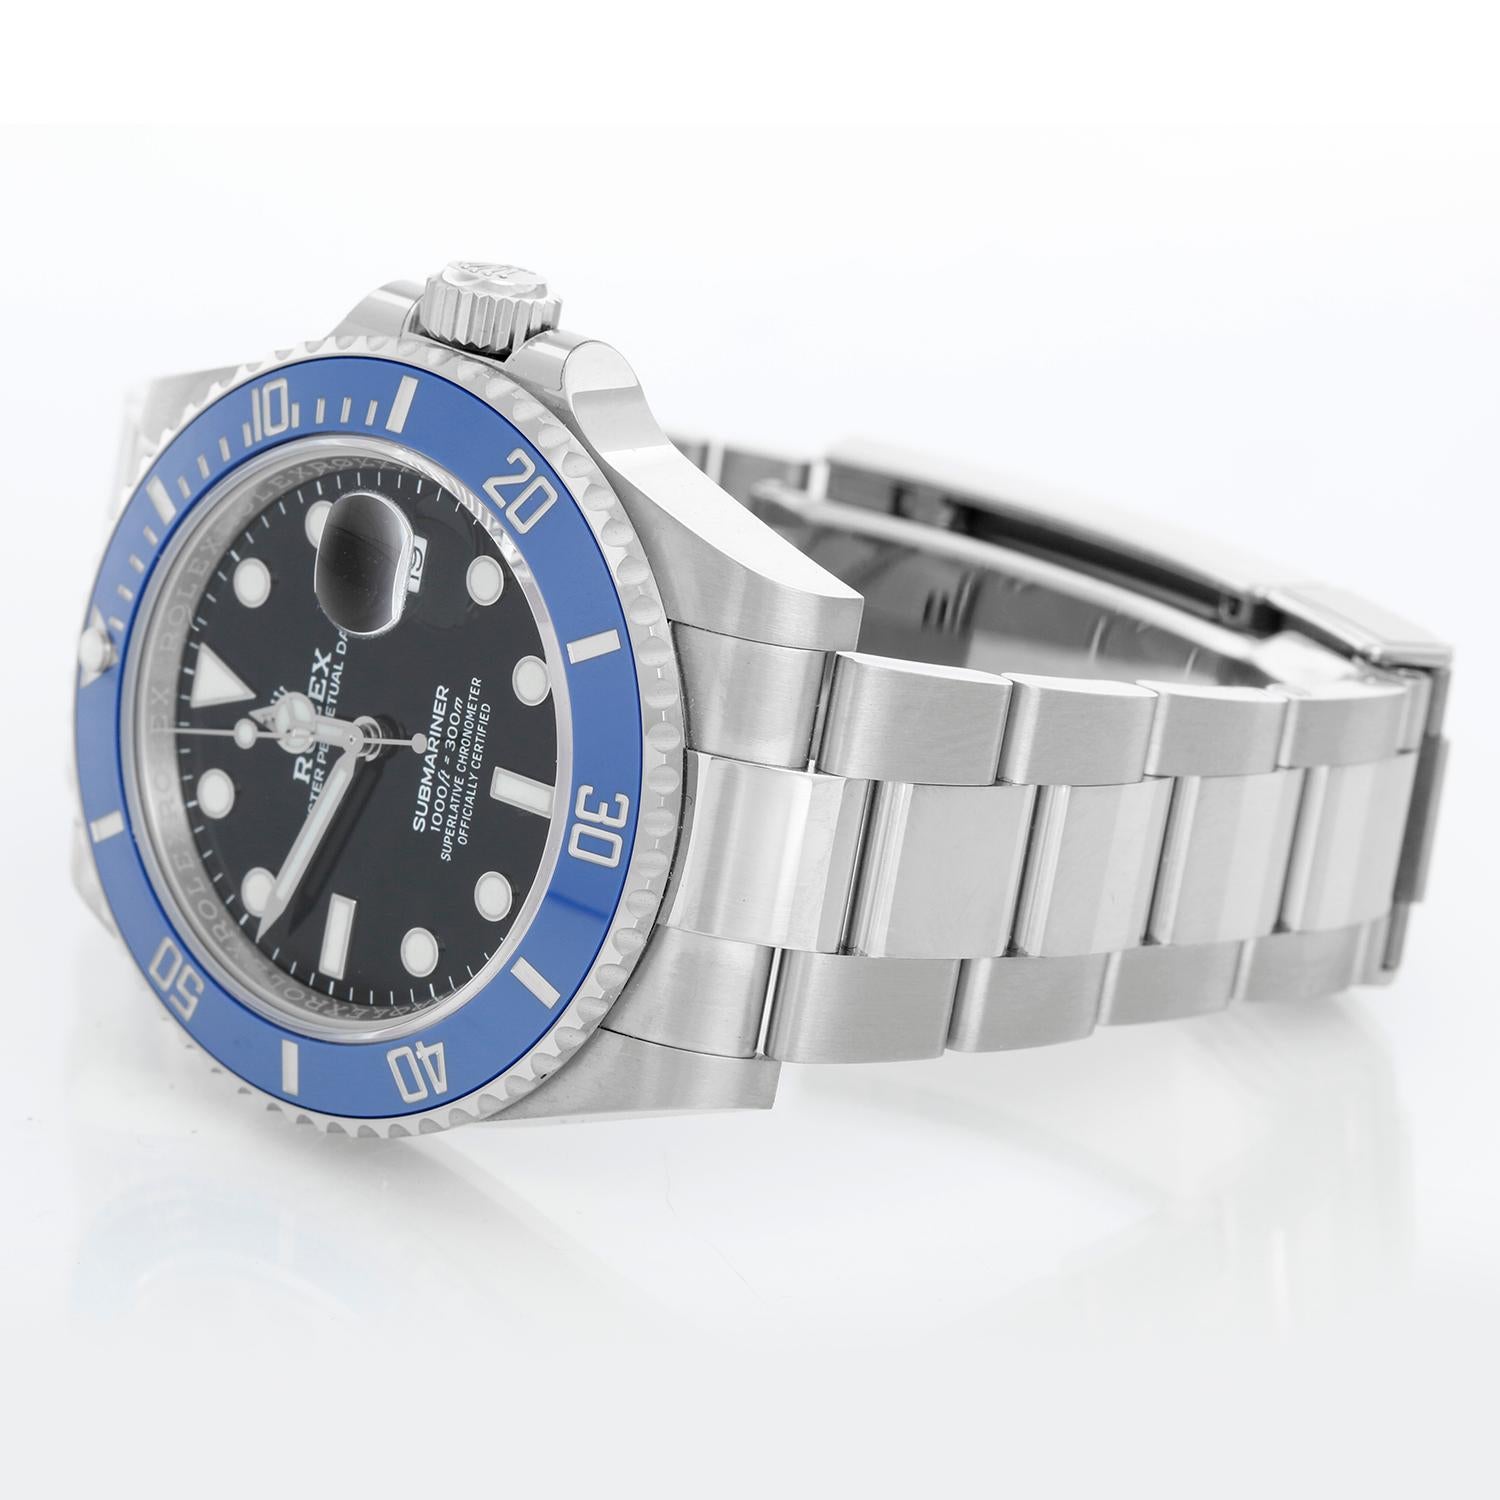 Rolex Submariner 18k White Gold Men's Watch 126619LB - Automatic winding caliber 3235 movement, sapphire crystal, pressure-proof to 1,000 feet, date. 41mm - 18k white gold case with blue Cerachrom bezel. Blue dial with luminous style markers. 18k